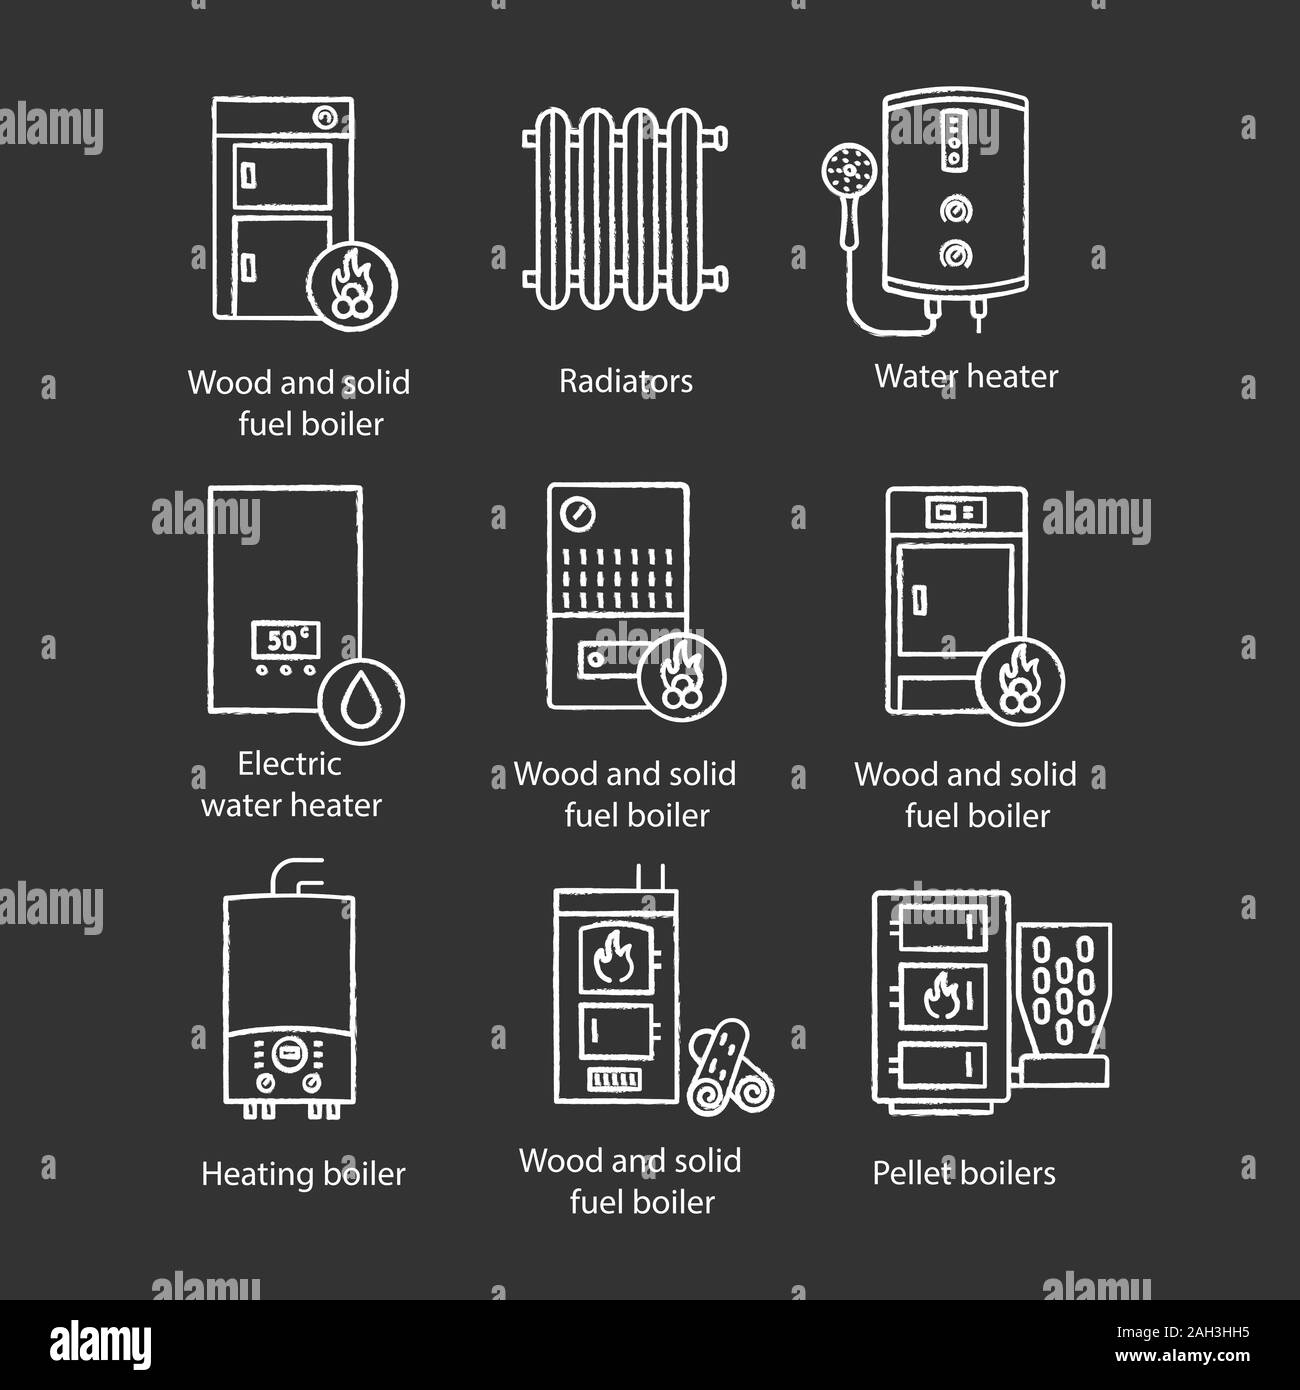 Heating chalk icons set. Boilers, radiators, water heaters. Gas, electric, pellet, boilers. Commercial, industrial, domestic central heating systems. Stock Vector